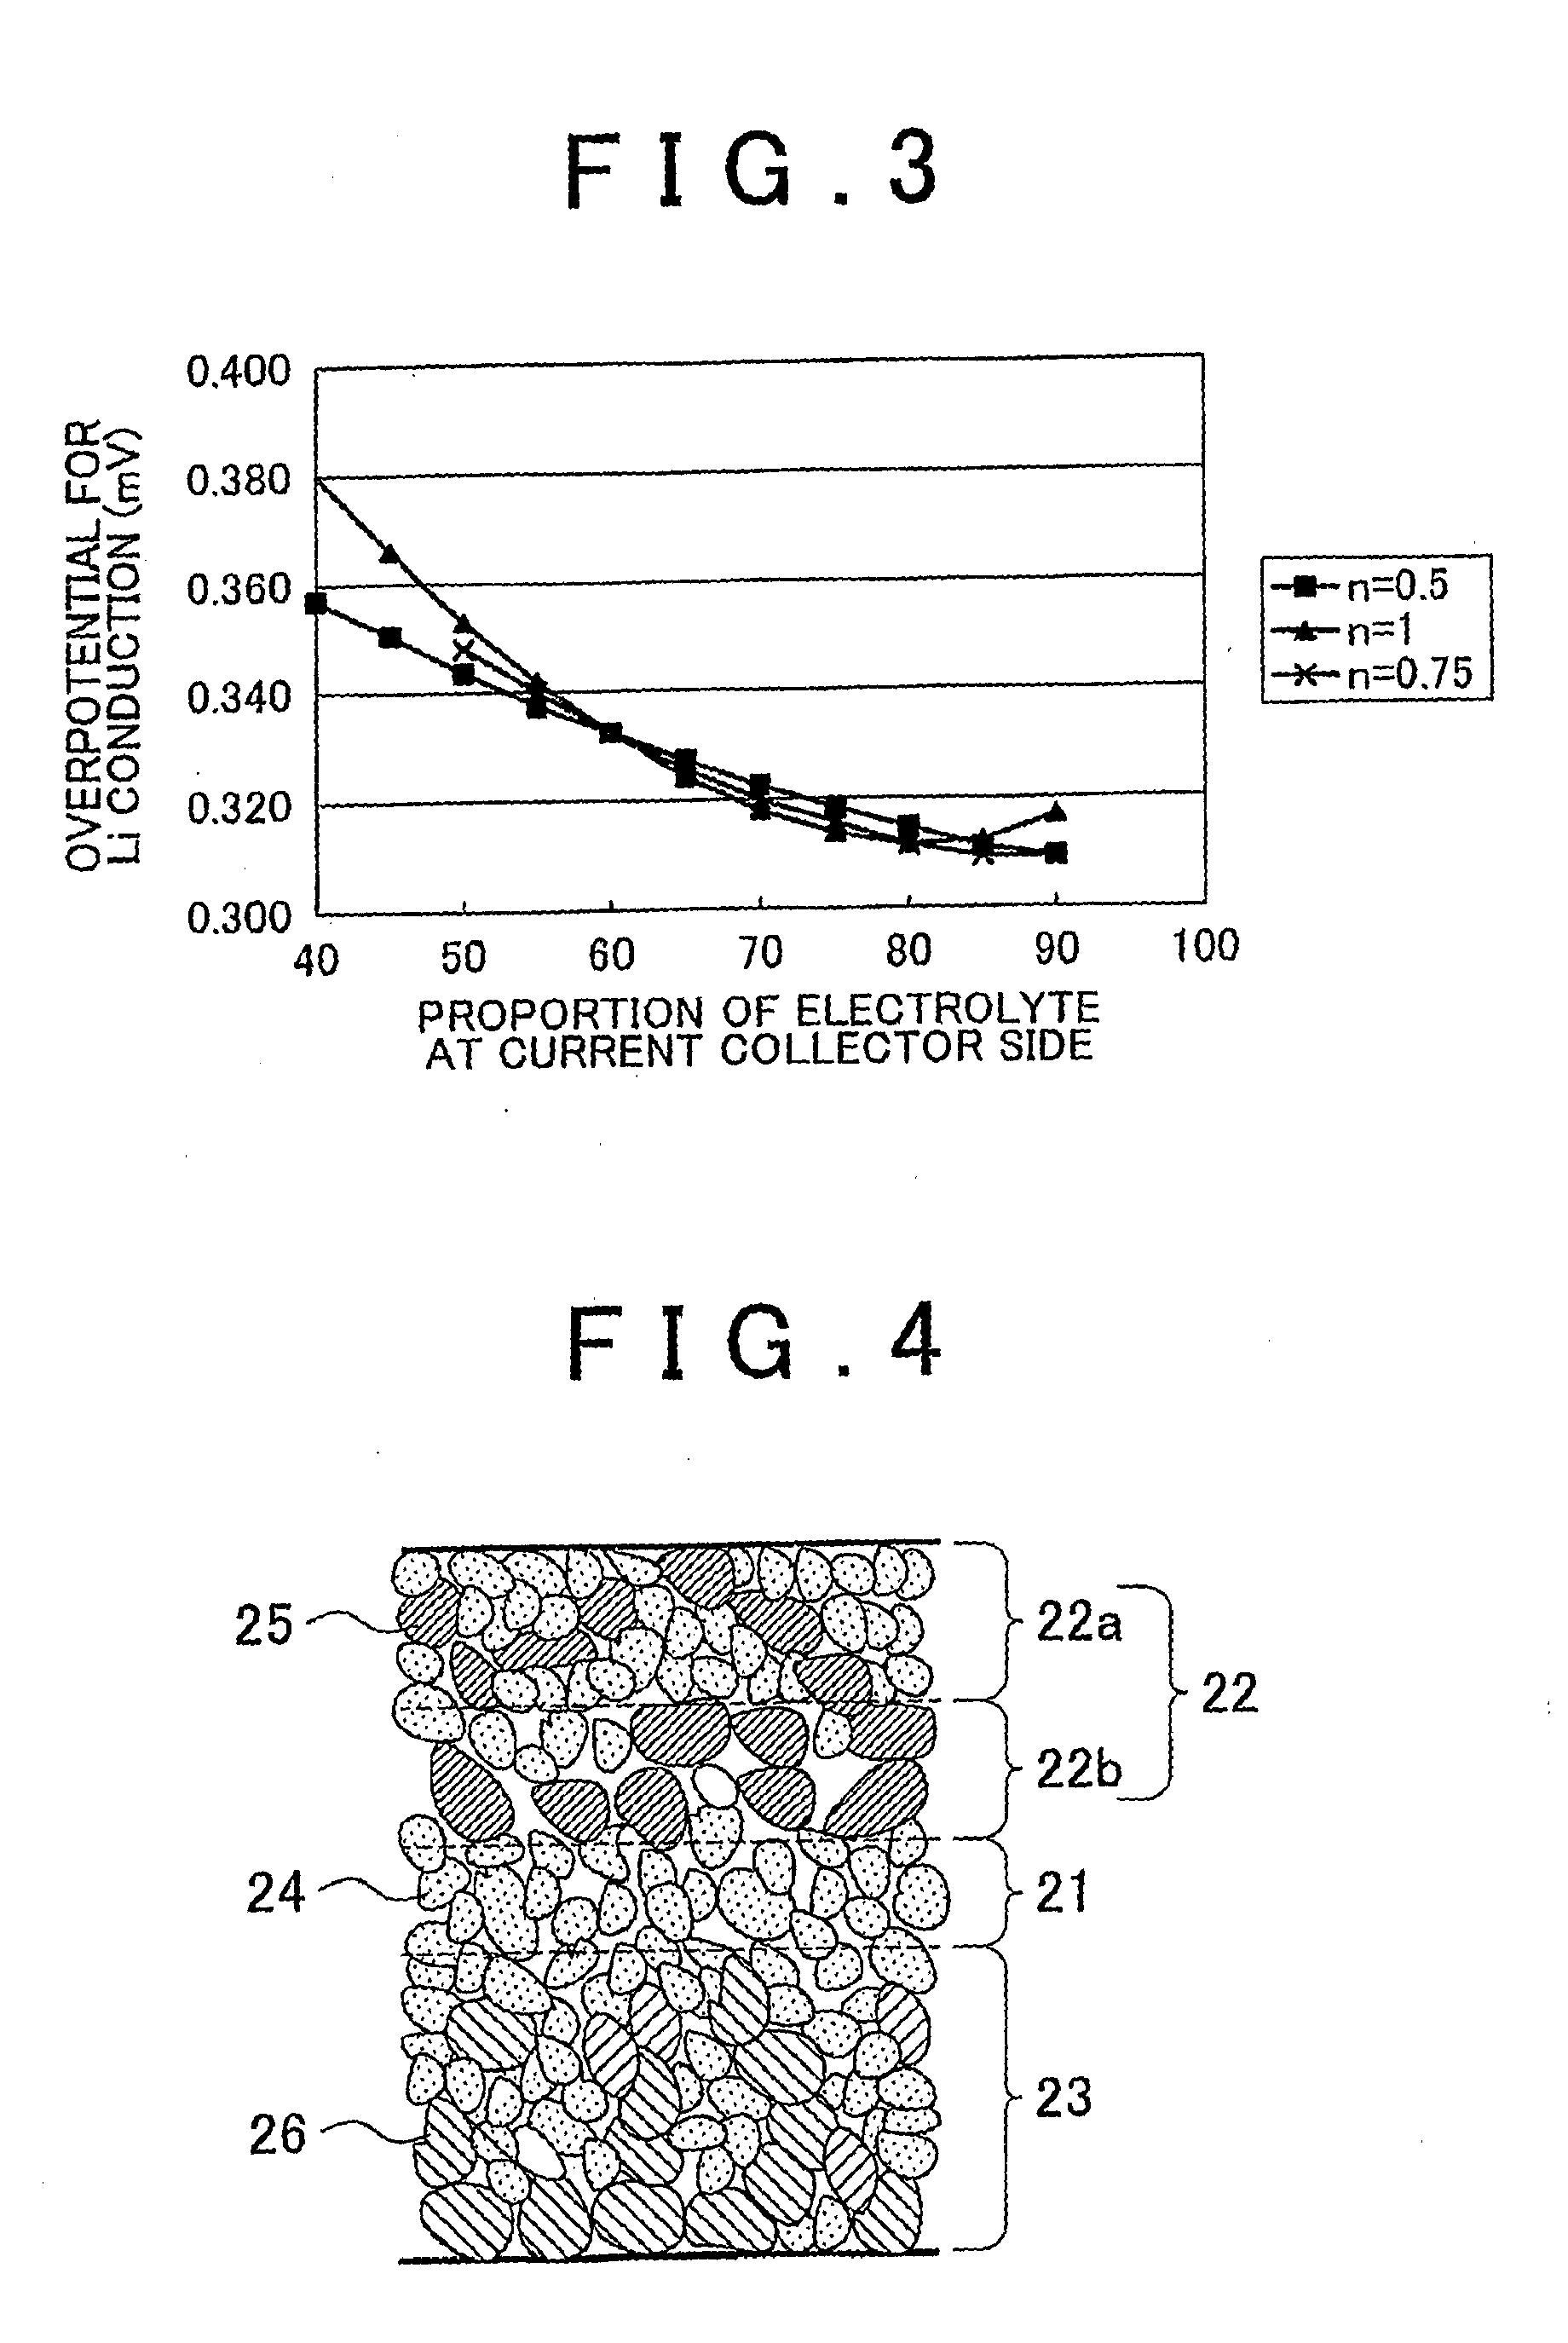 All-solid secondary battery with graded electrodes